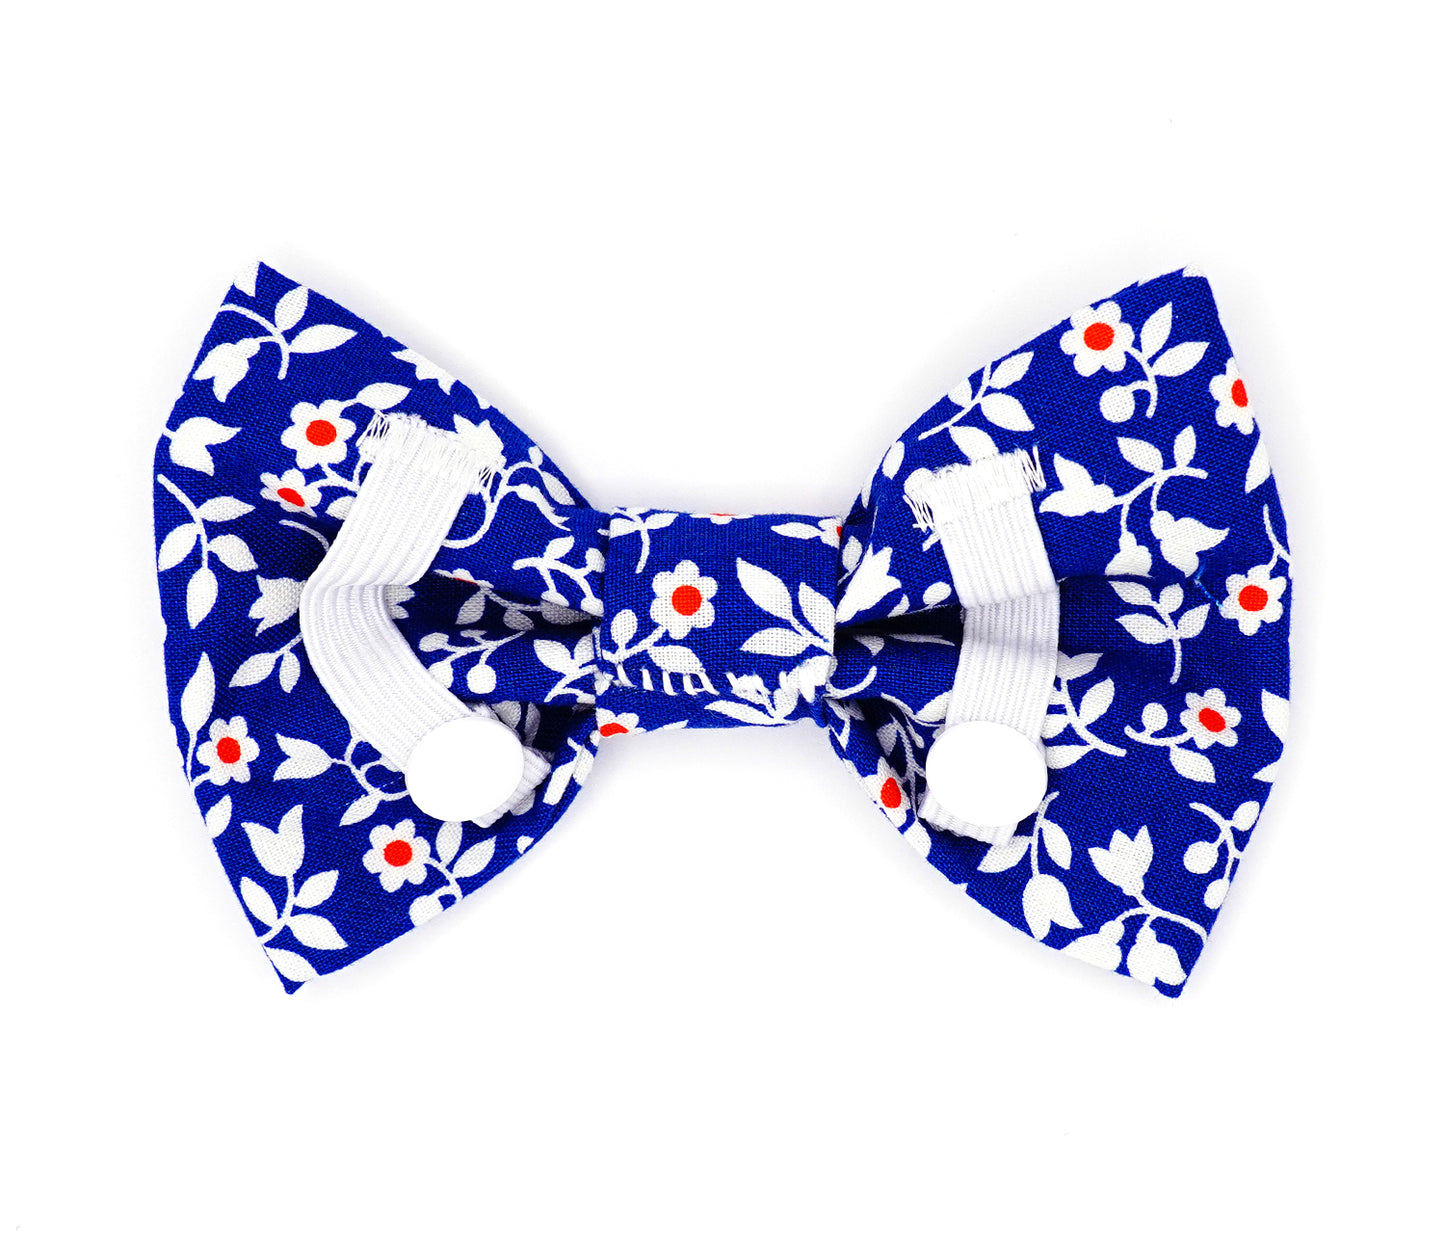 Handmade cotton bow tie for dogs (or other pets). Elastic straps on back with snaps make it easy to add to collar, harness, or leash. Medium blue background with red and white flowers.